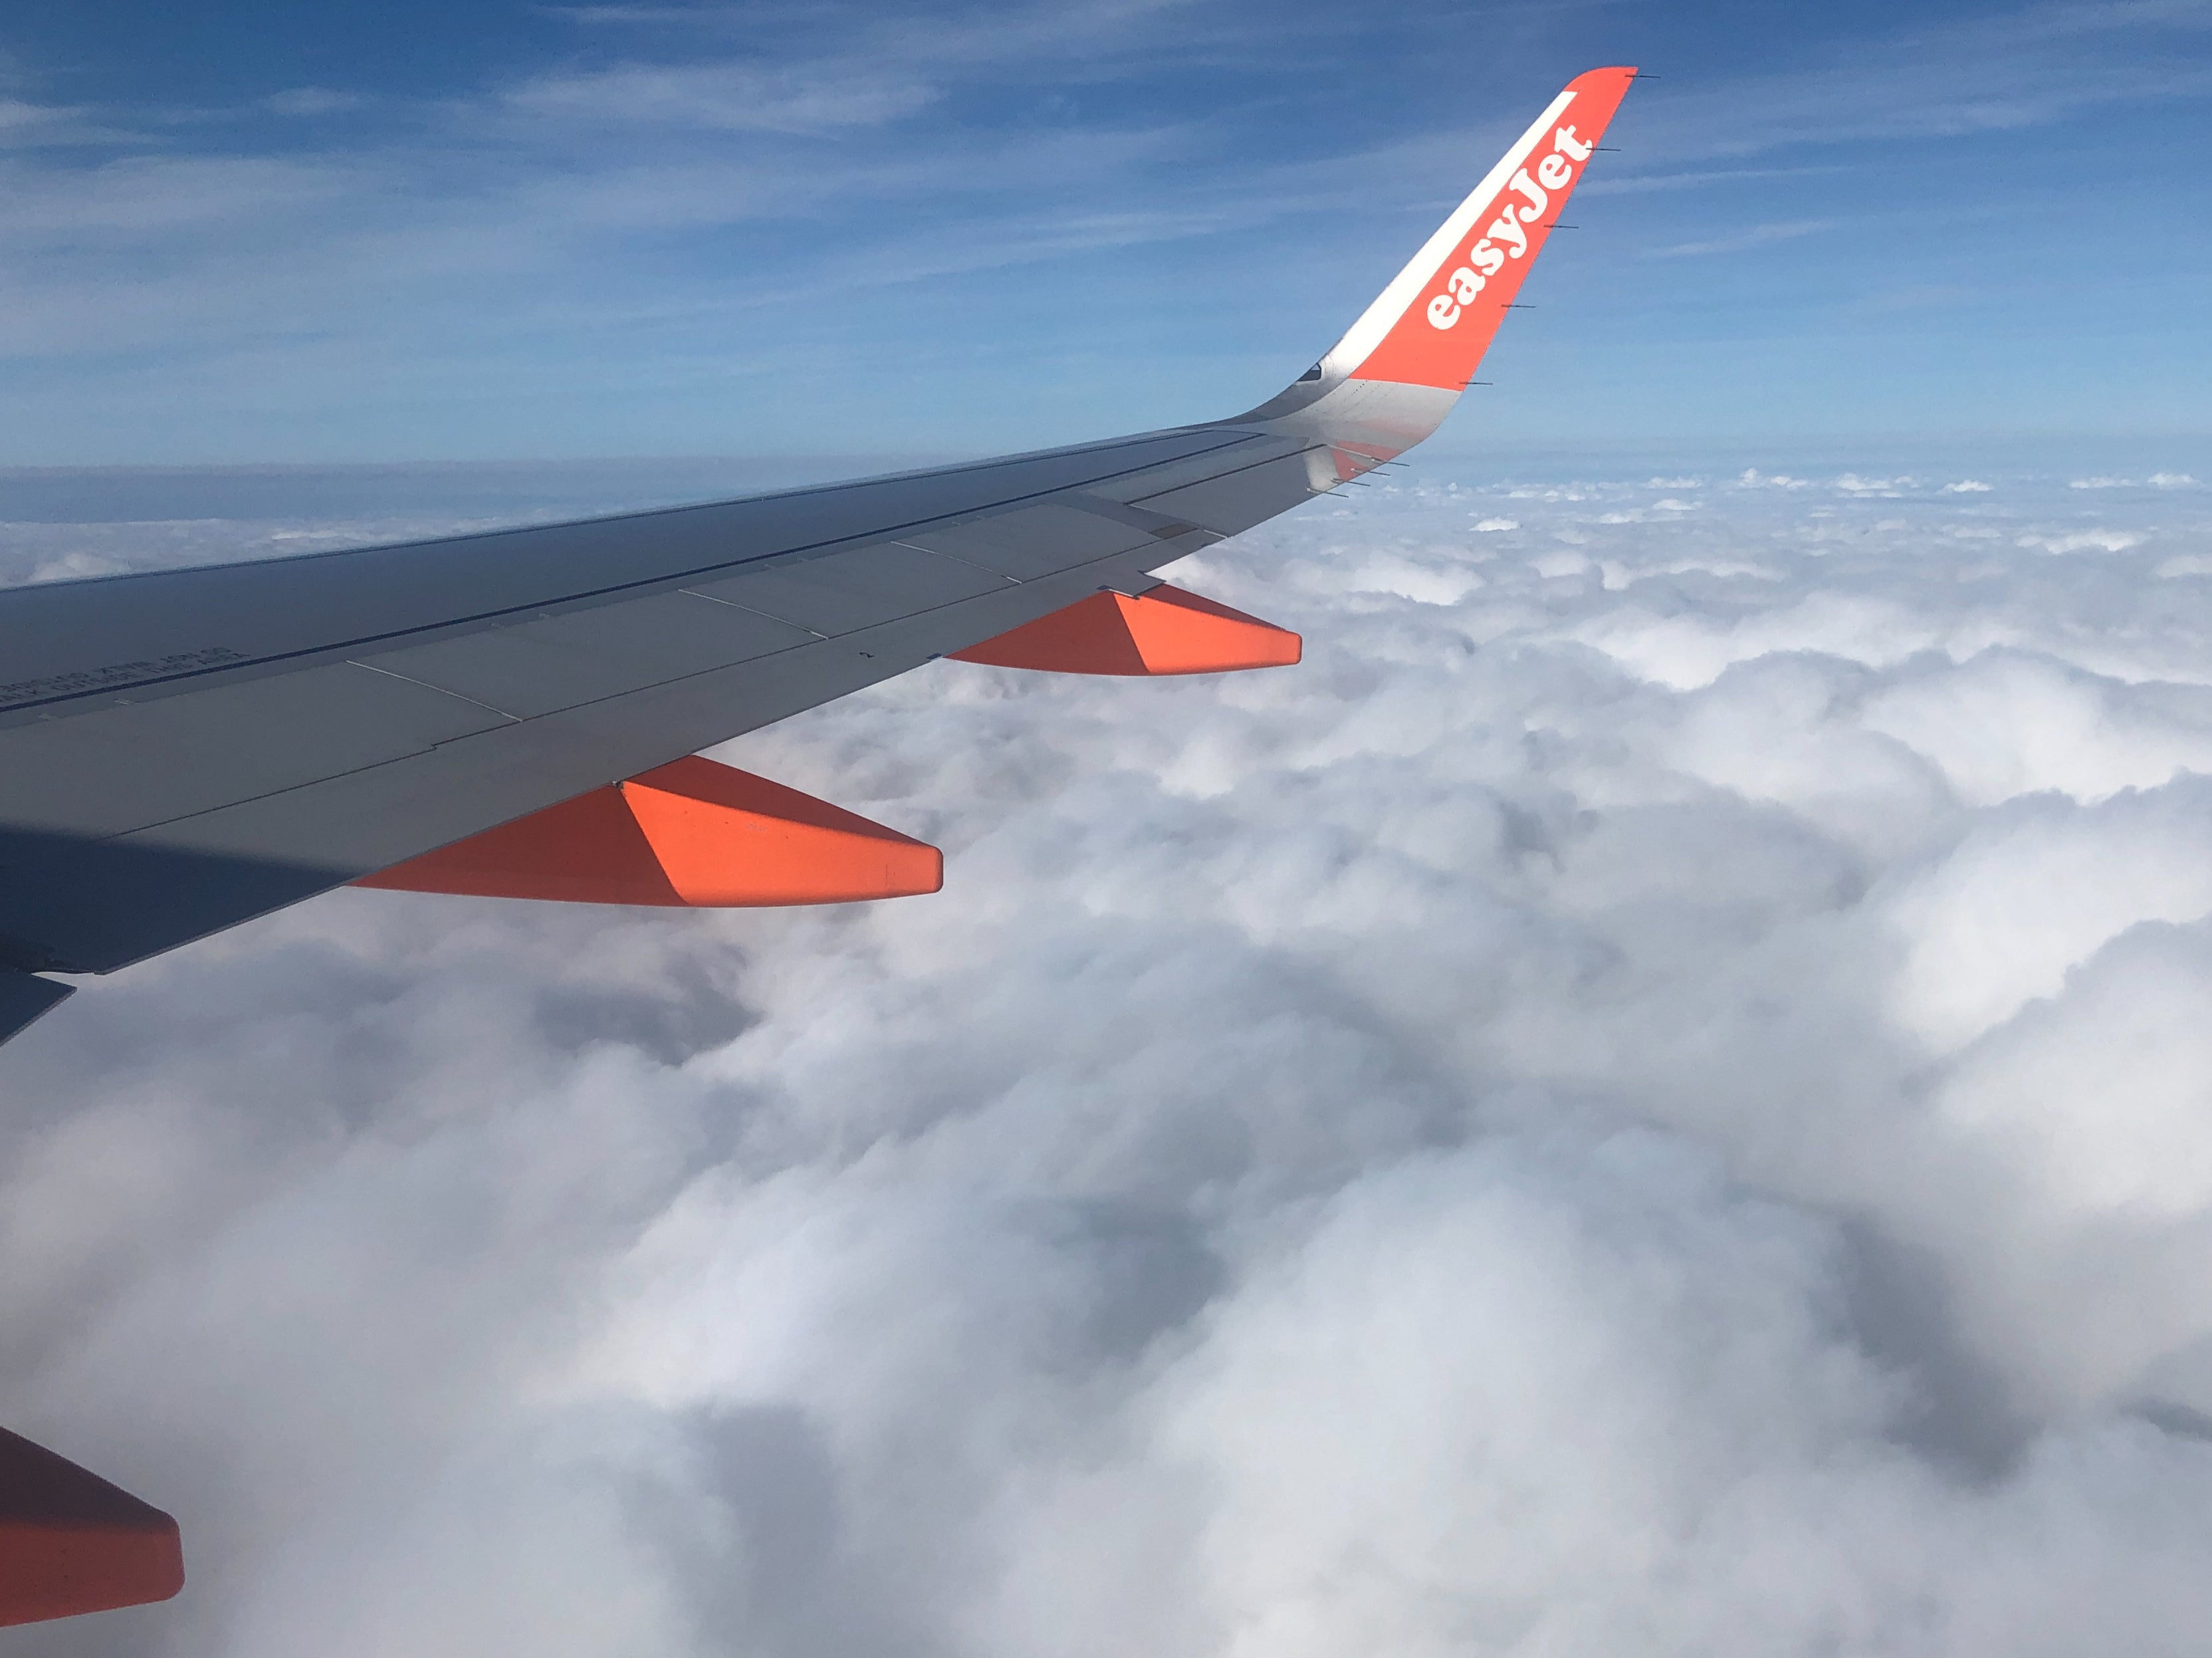 Strictly flying: view from an easyJet window